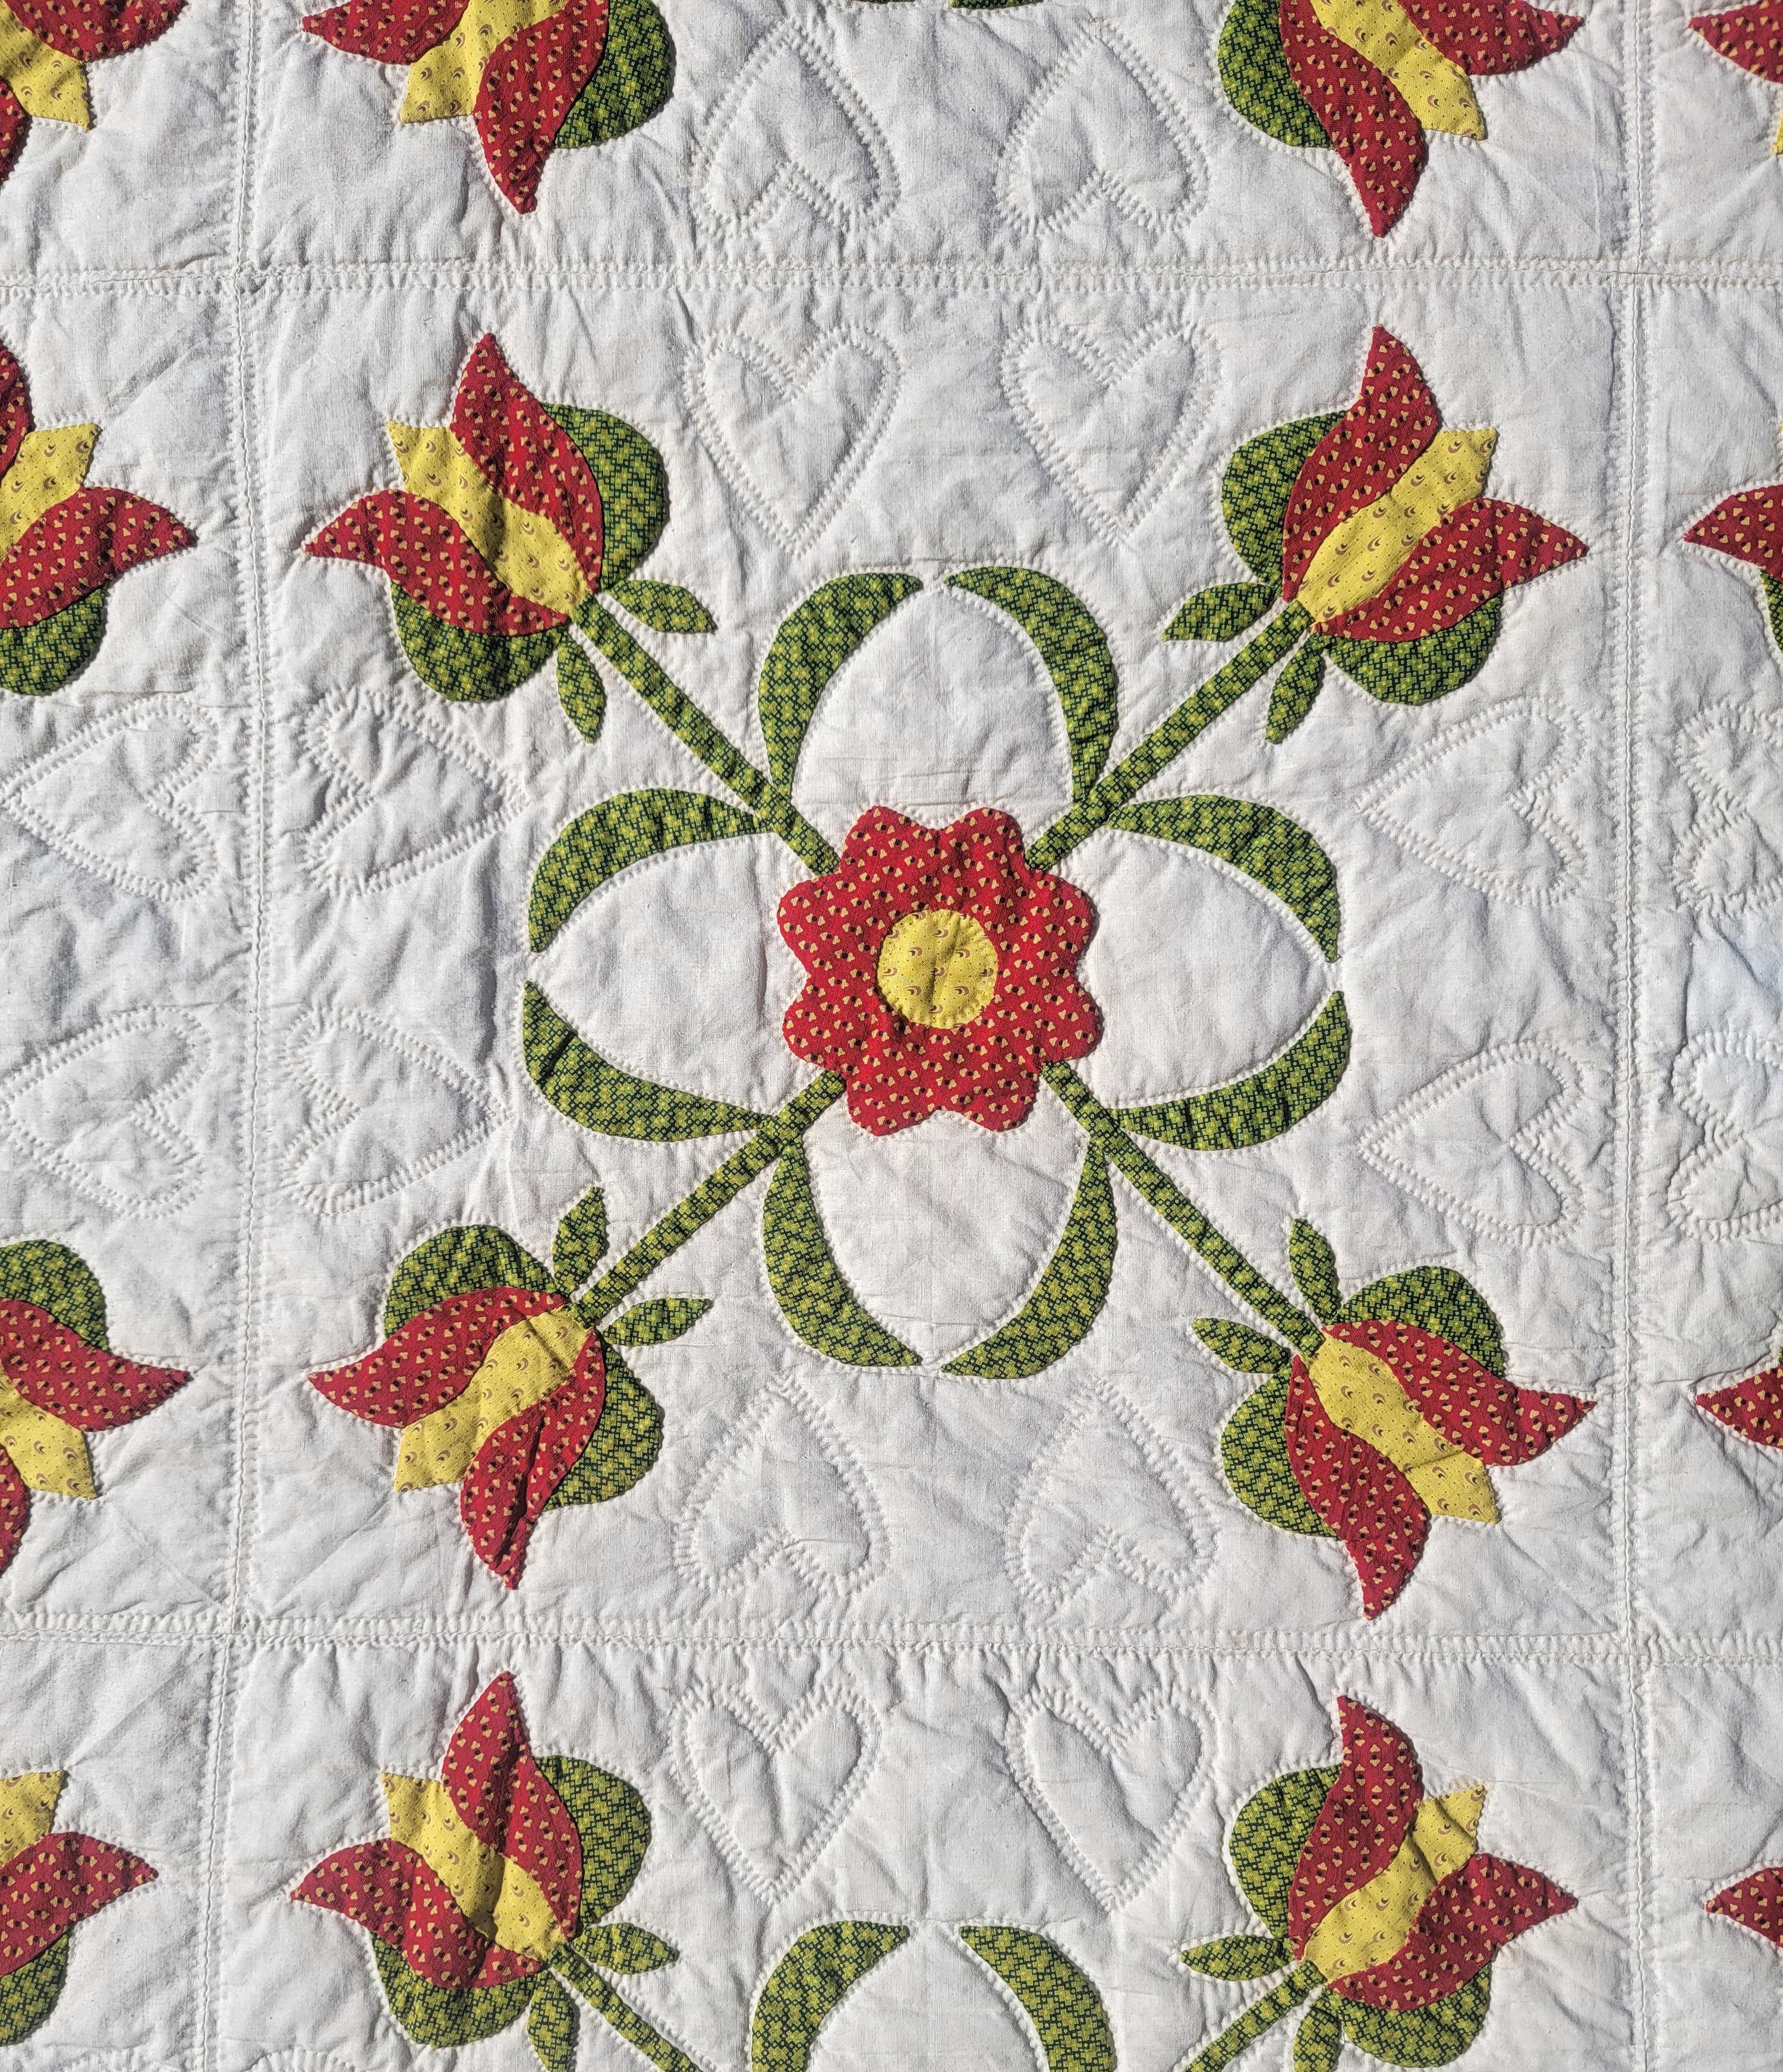 Hand-Crafted 19Thc Pennsylvania Tulips Applique Quilt For Sale